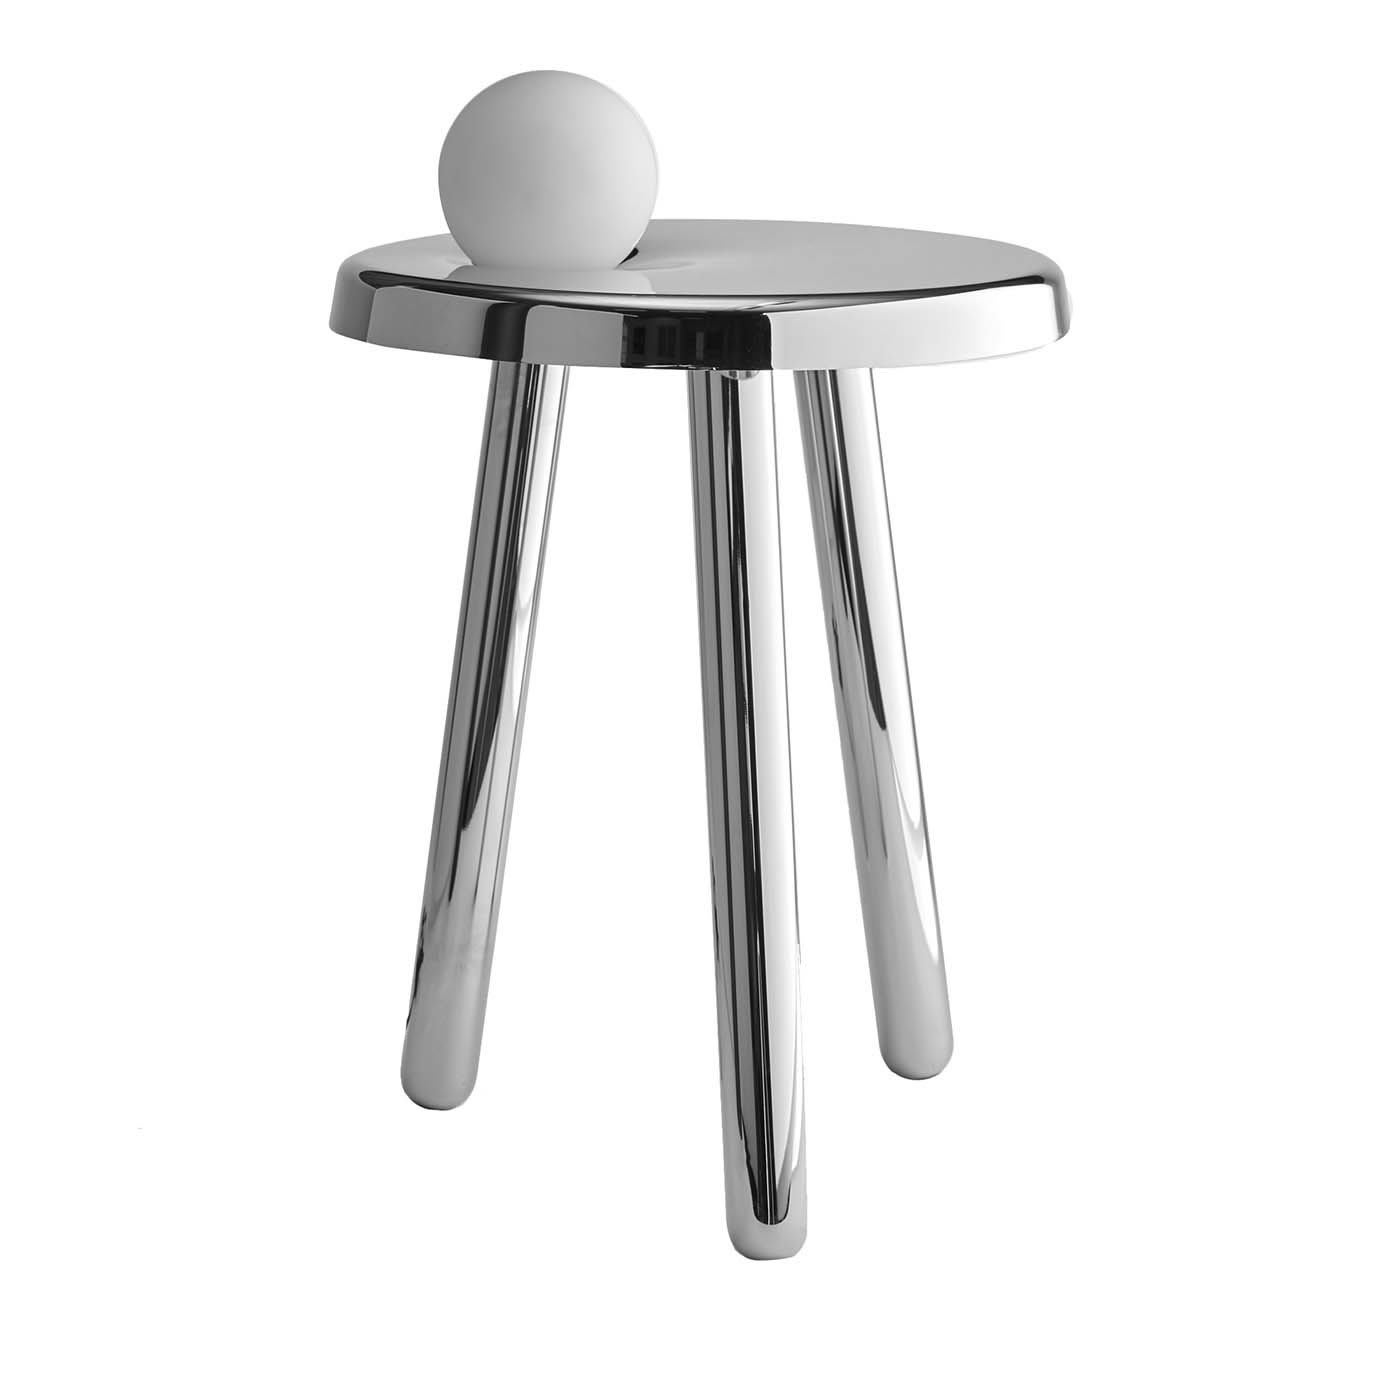 Alby Side table with Light - Mason Editions